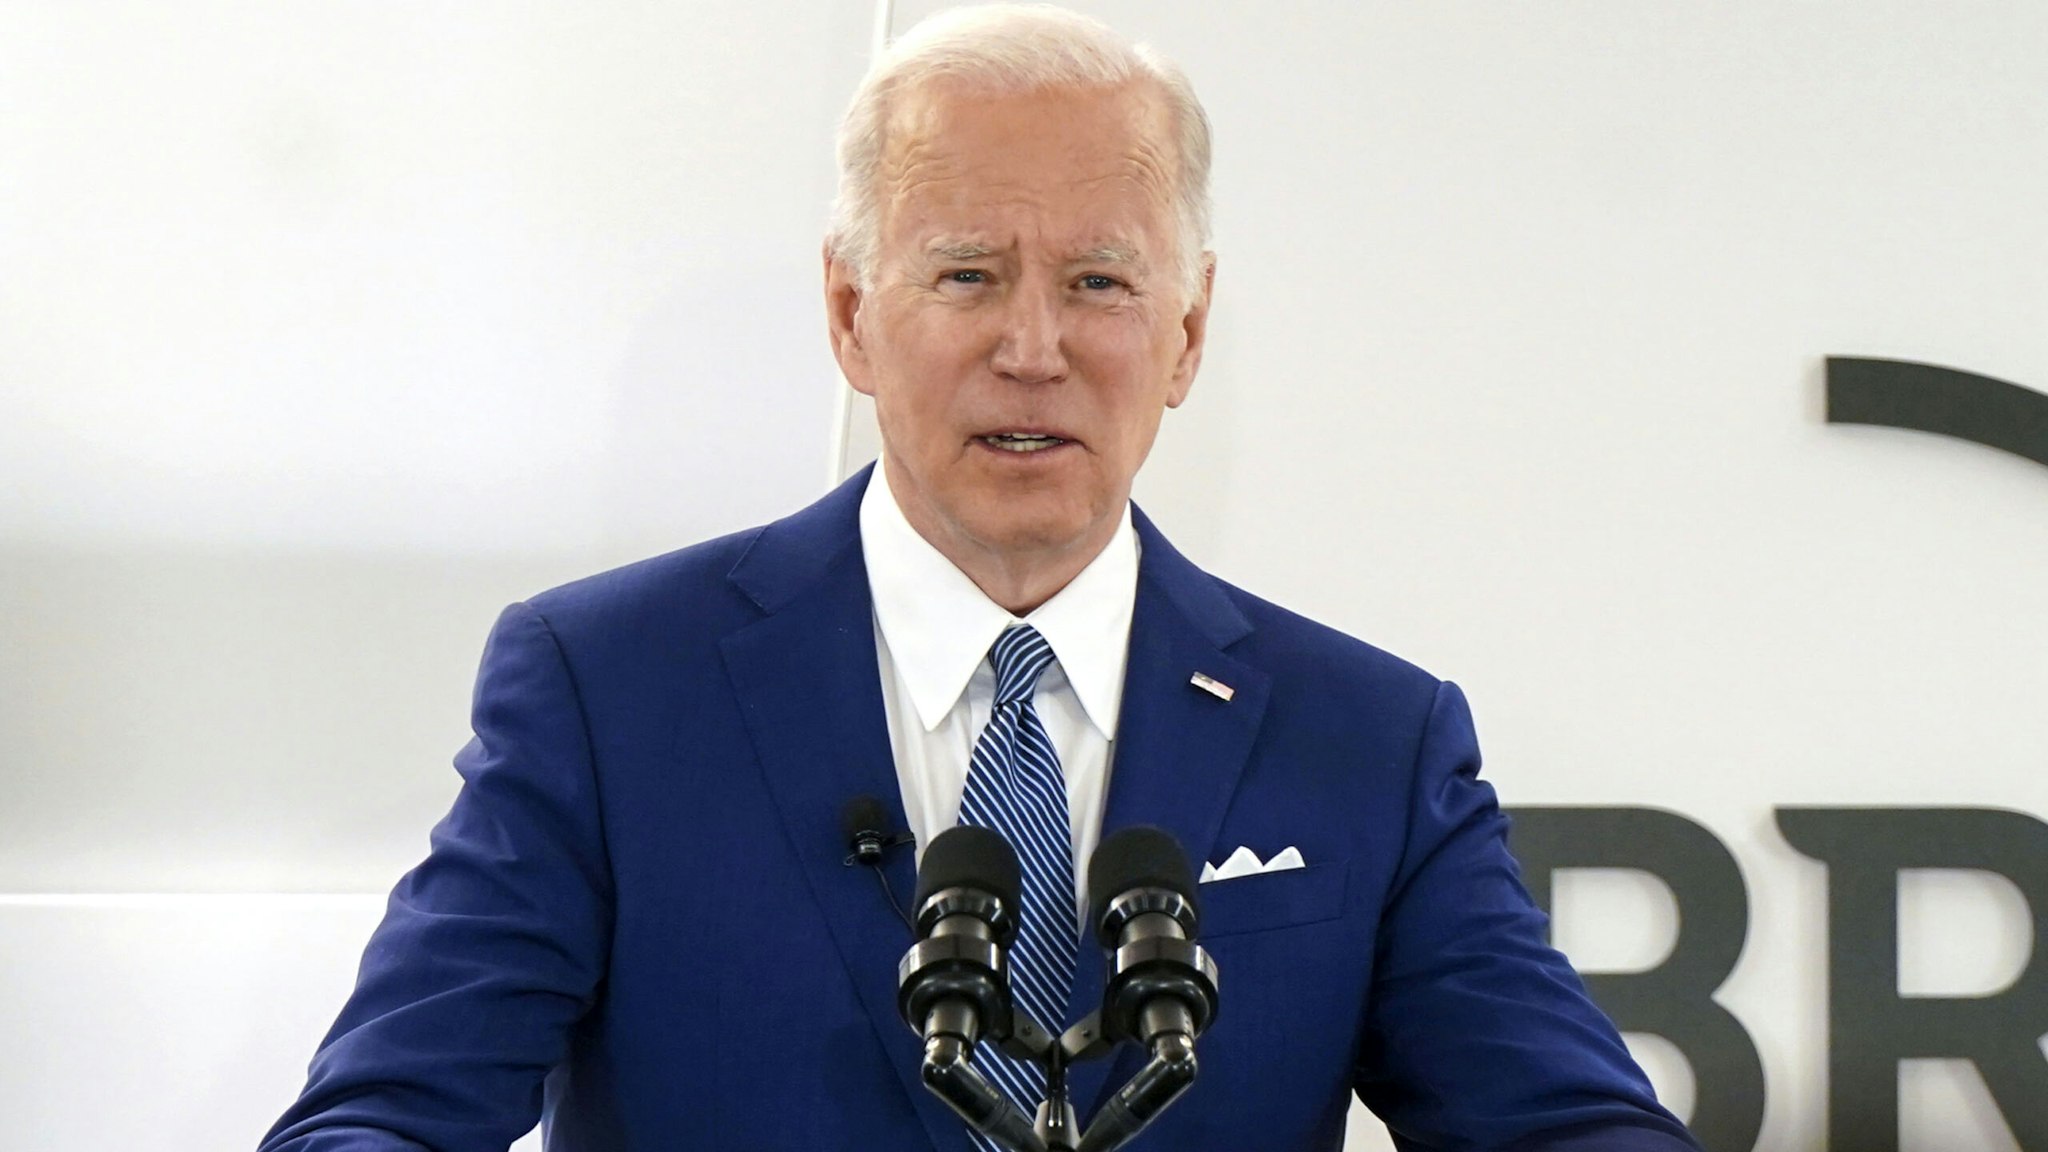 U.S. President Joe Biden speaks while joining the Business Roundtable's chief executive officer quarterly meeting in Washington, D.C., U.S., on Monday, March 21, 2022. Biden is expected to discuss the United States' response to Russia's war with Ukraine and create good-paying union jobs according to the White House.